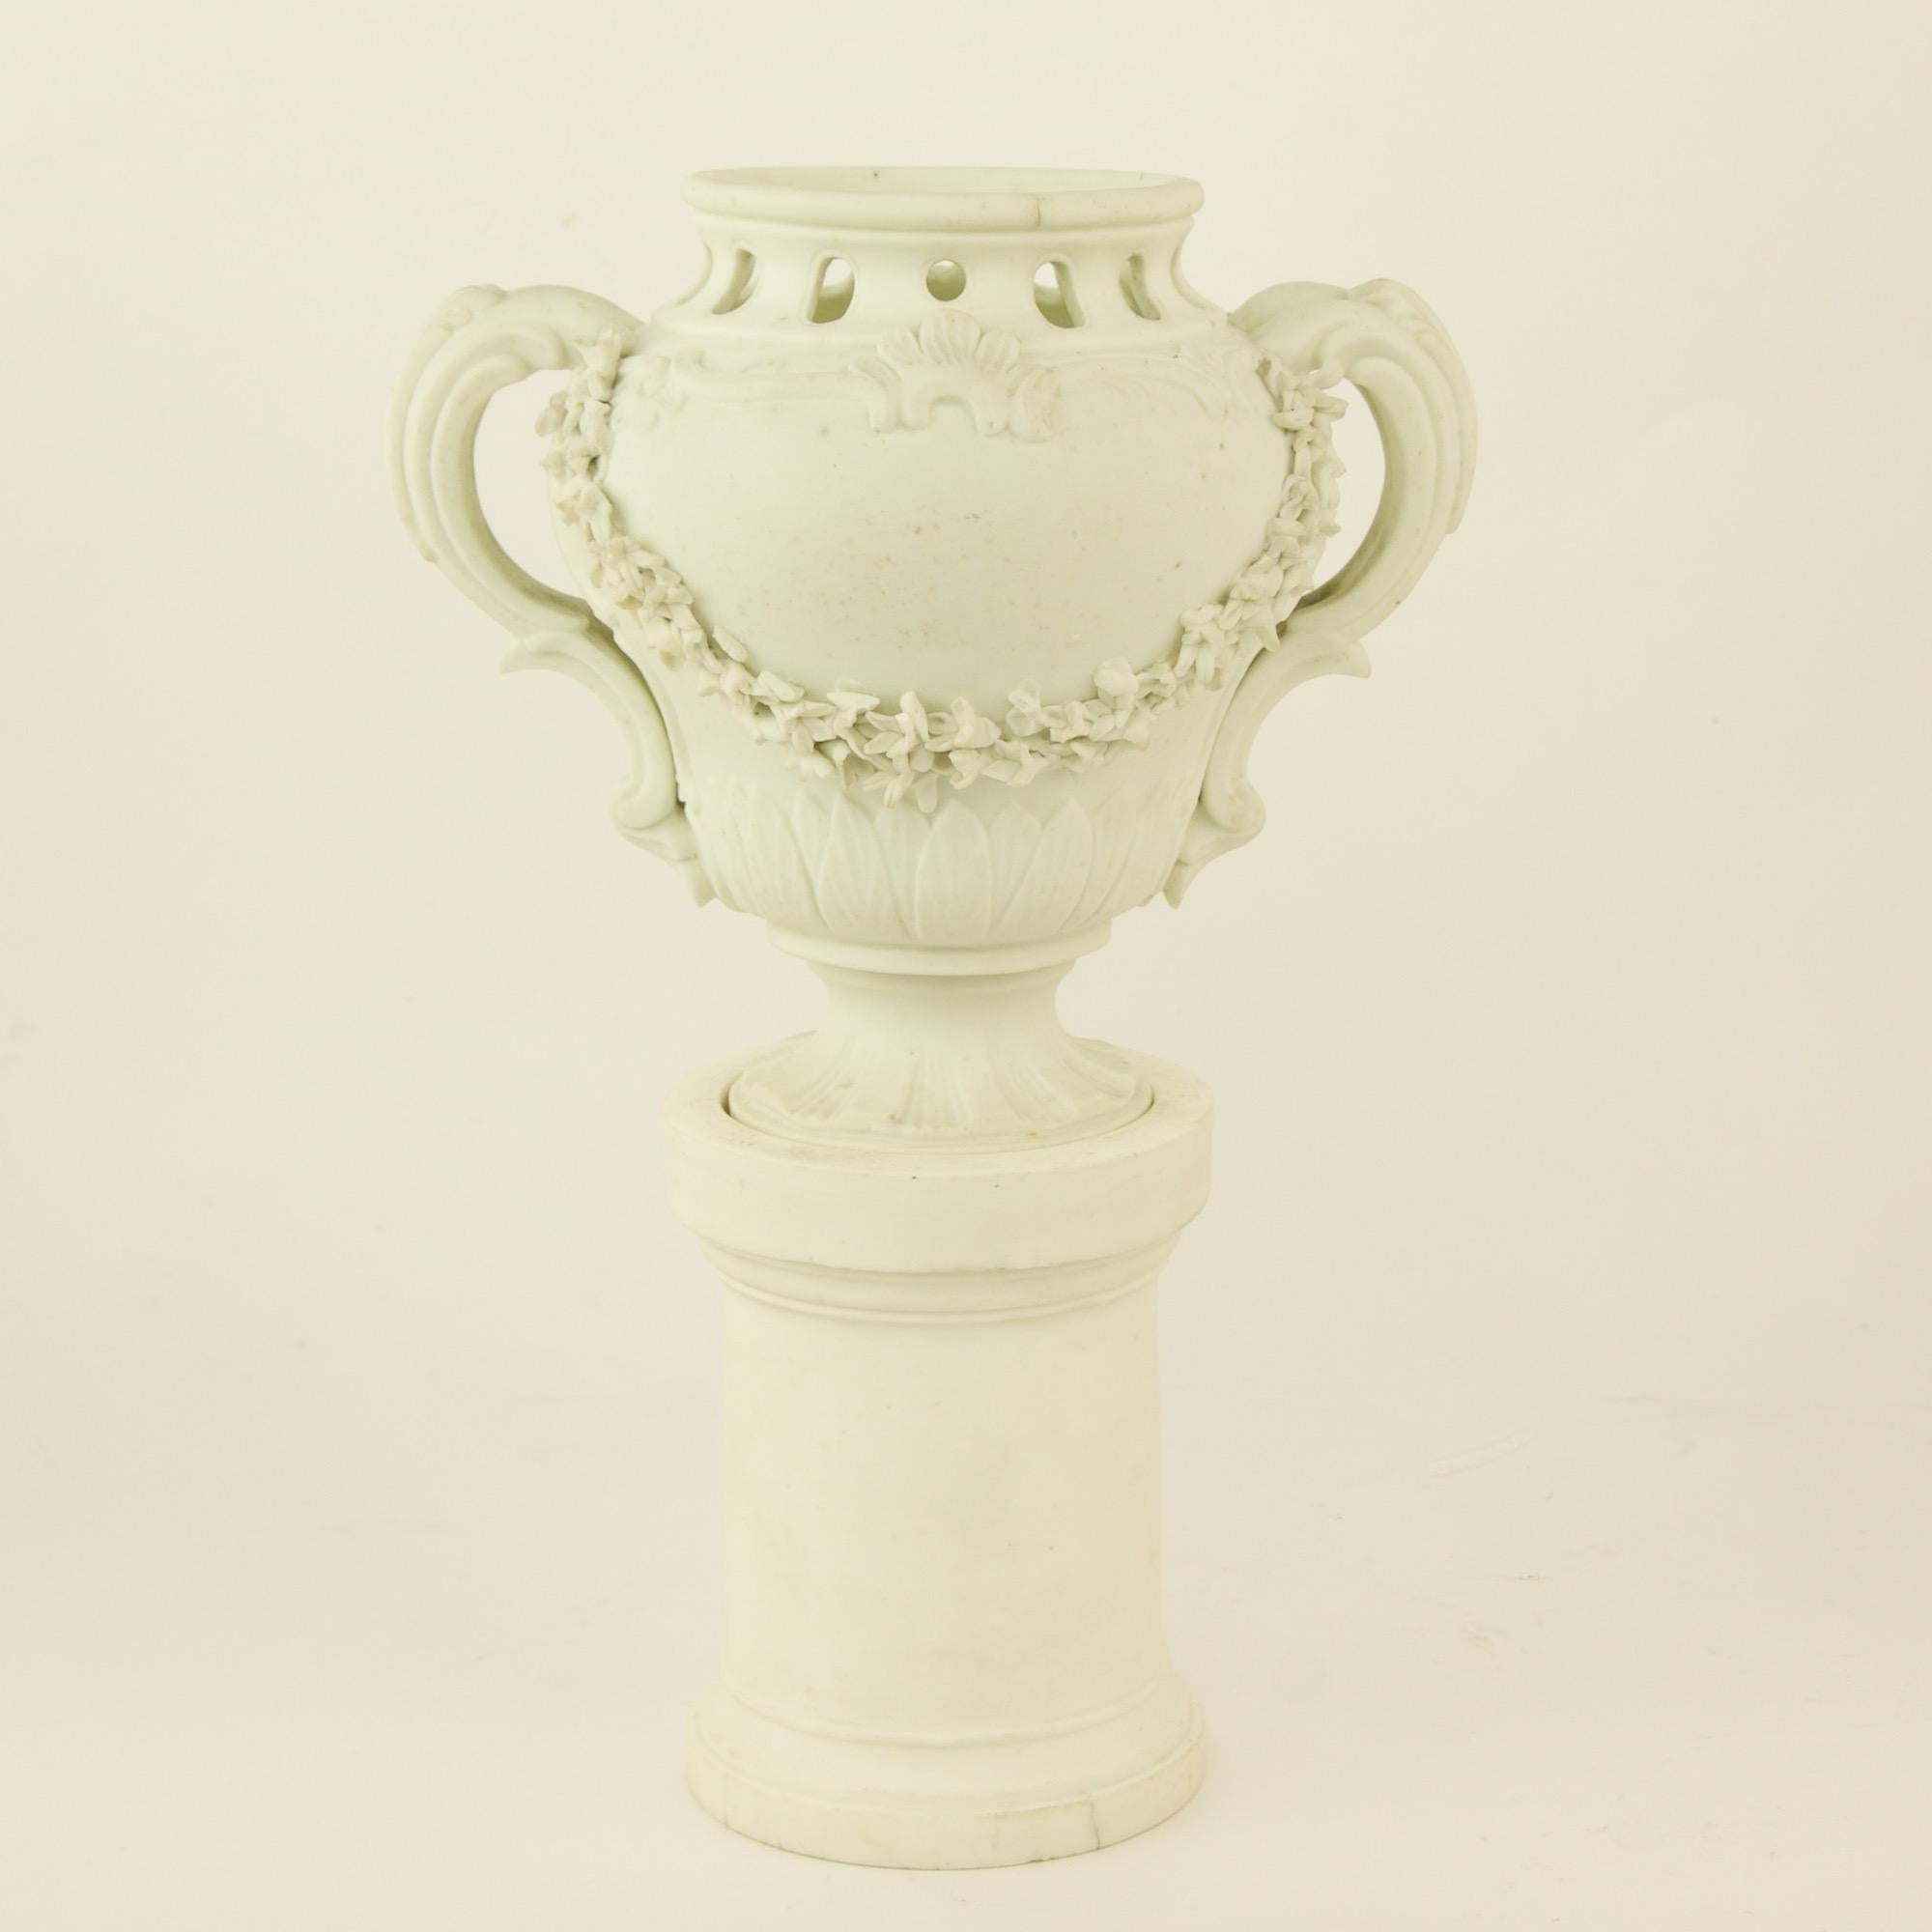 Pair of French Mid-18th Century Biscuit Porcelain Louis XV Vases and Pedestals For Sale 7